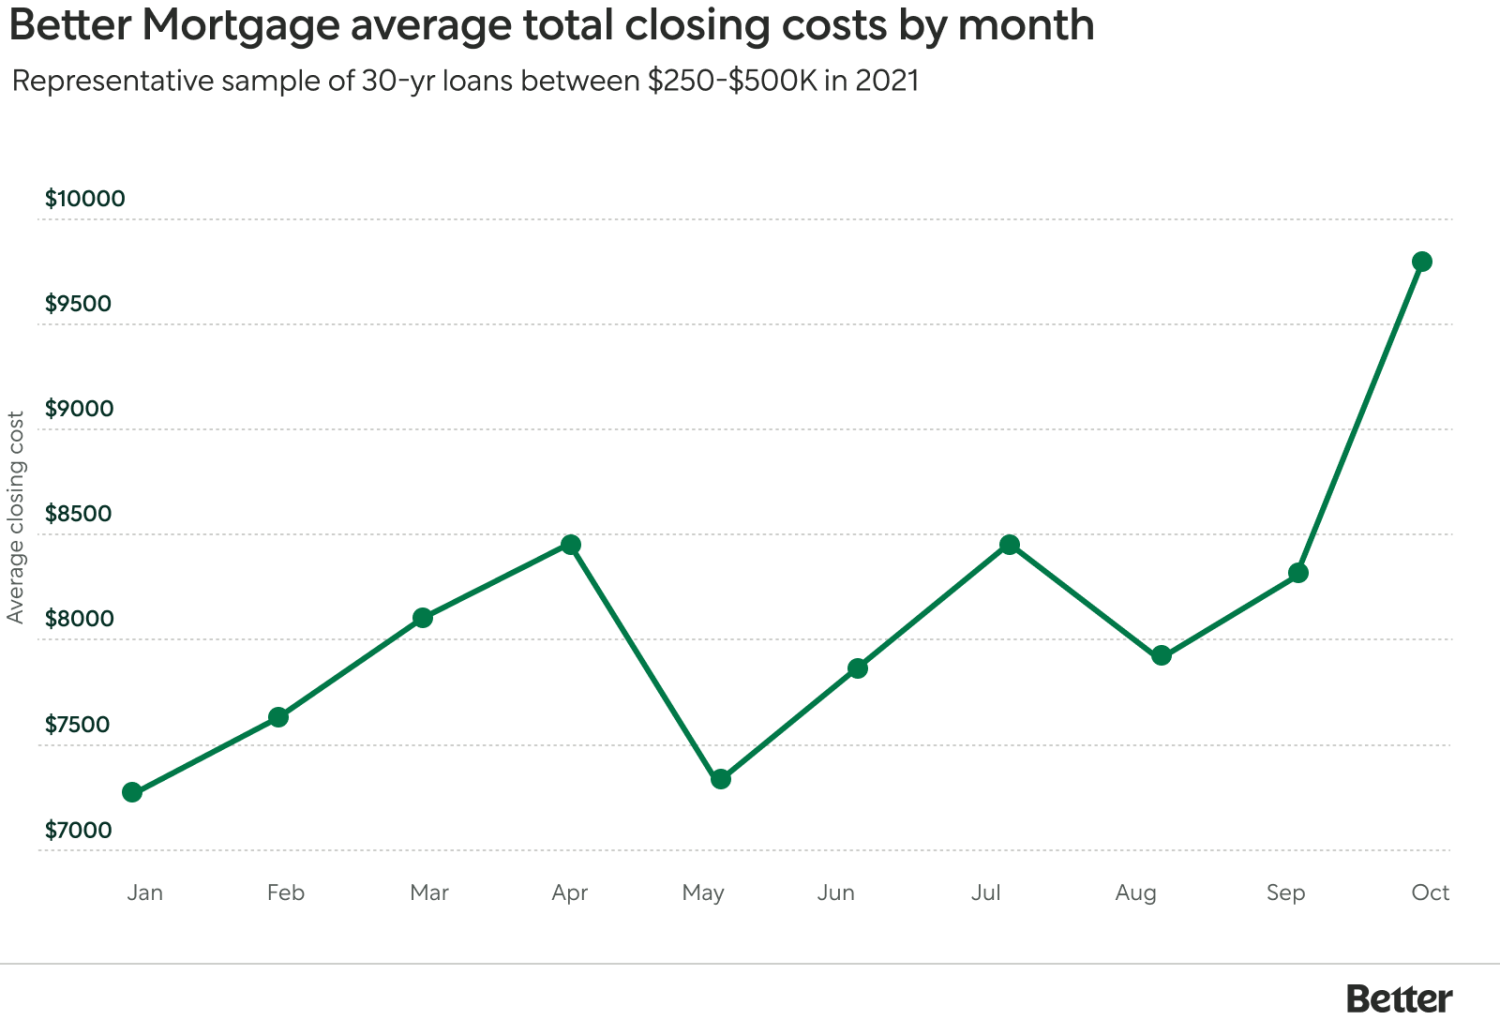 Line Graph: Better Mortgage Average Total Closing Costs By Month From January 2021 to October 2021